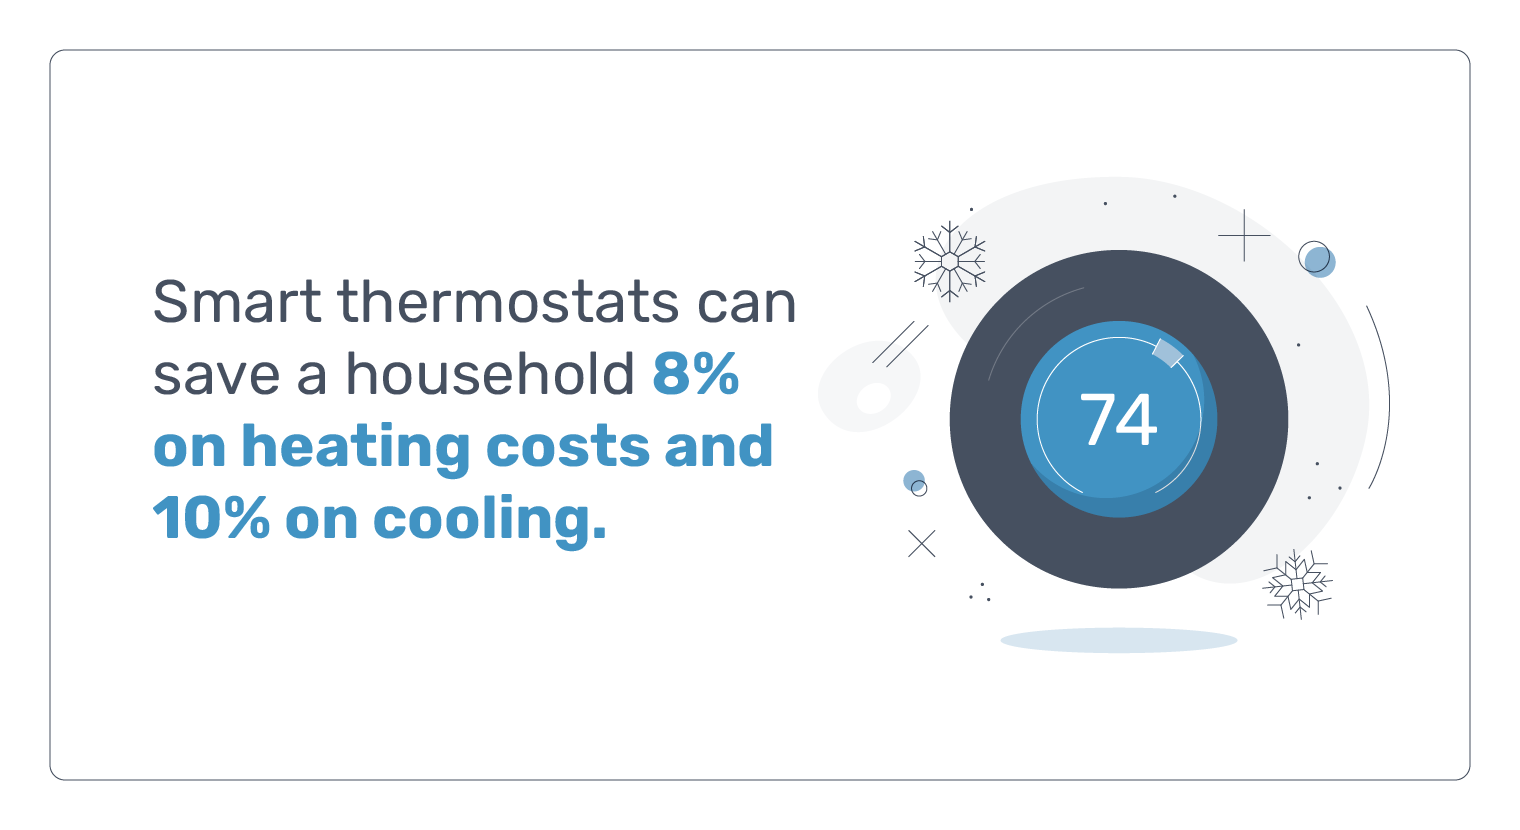 Illustration - Smart Thermostats can reduce your home's heating and cooling cost by 10 percent